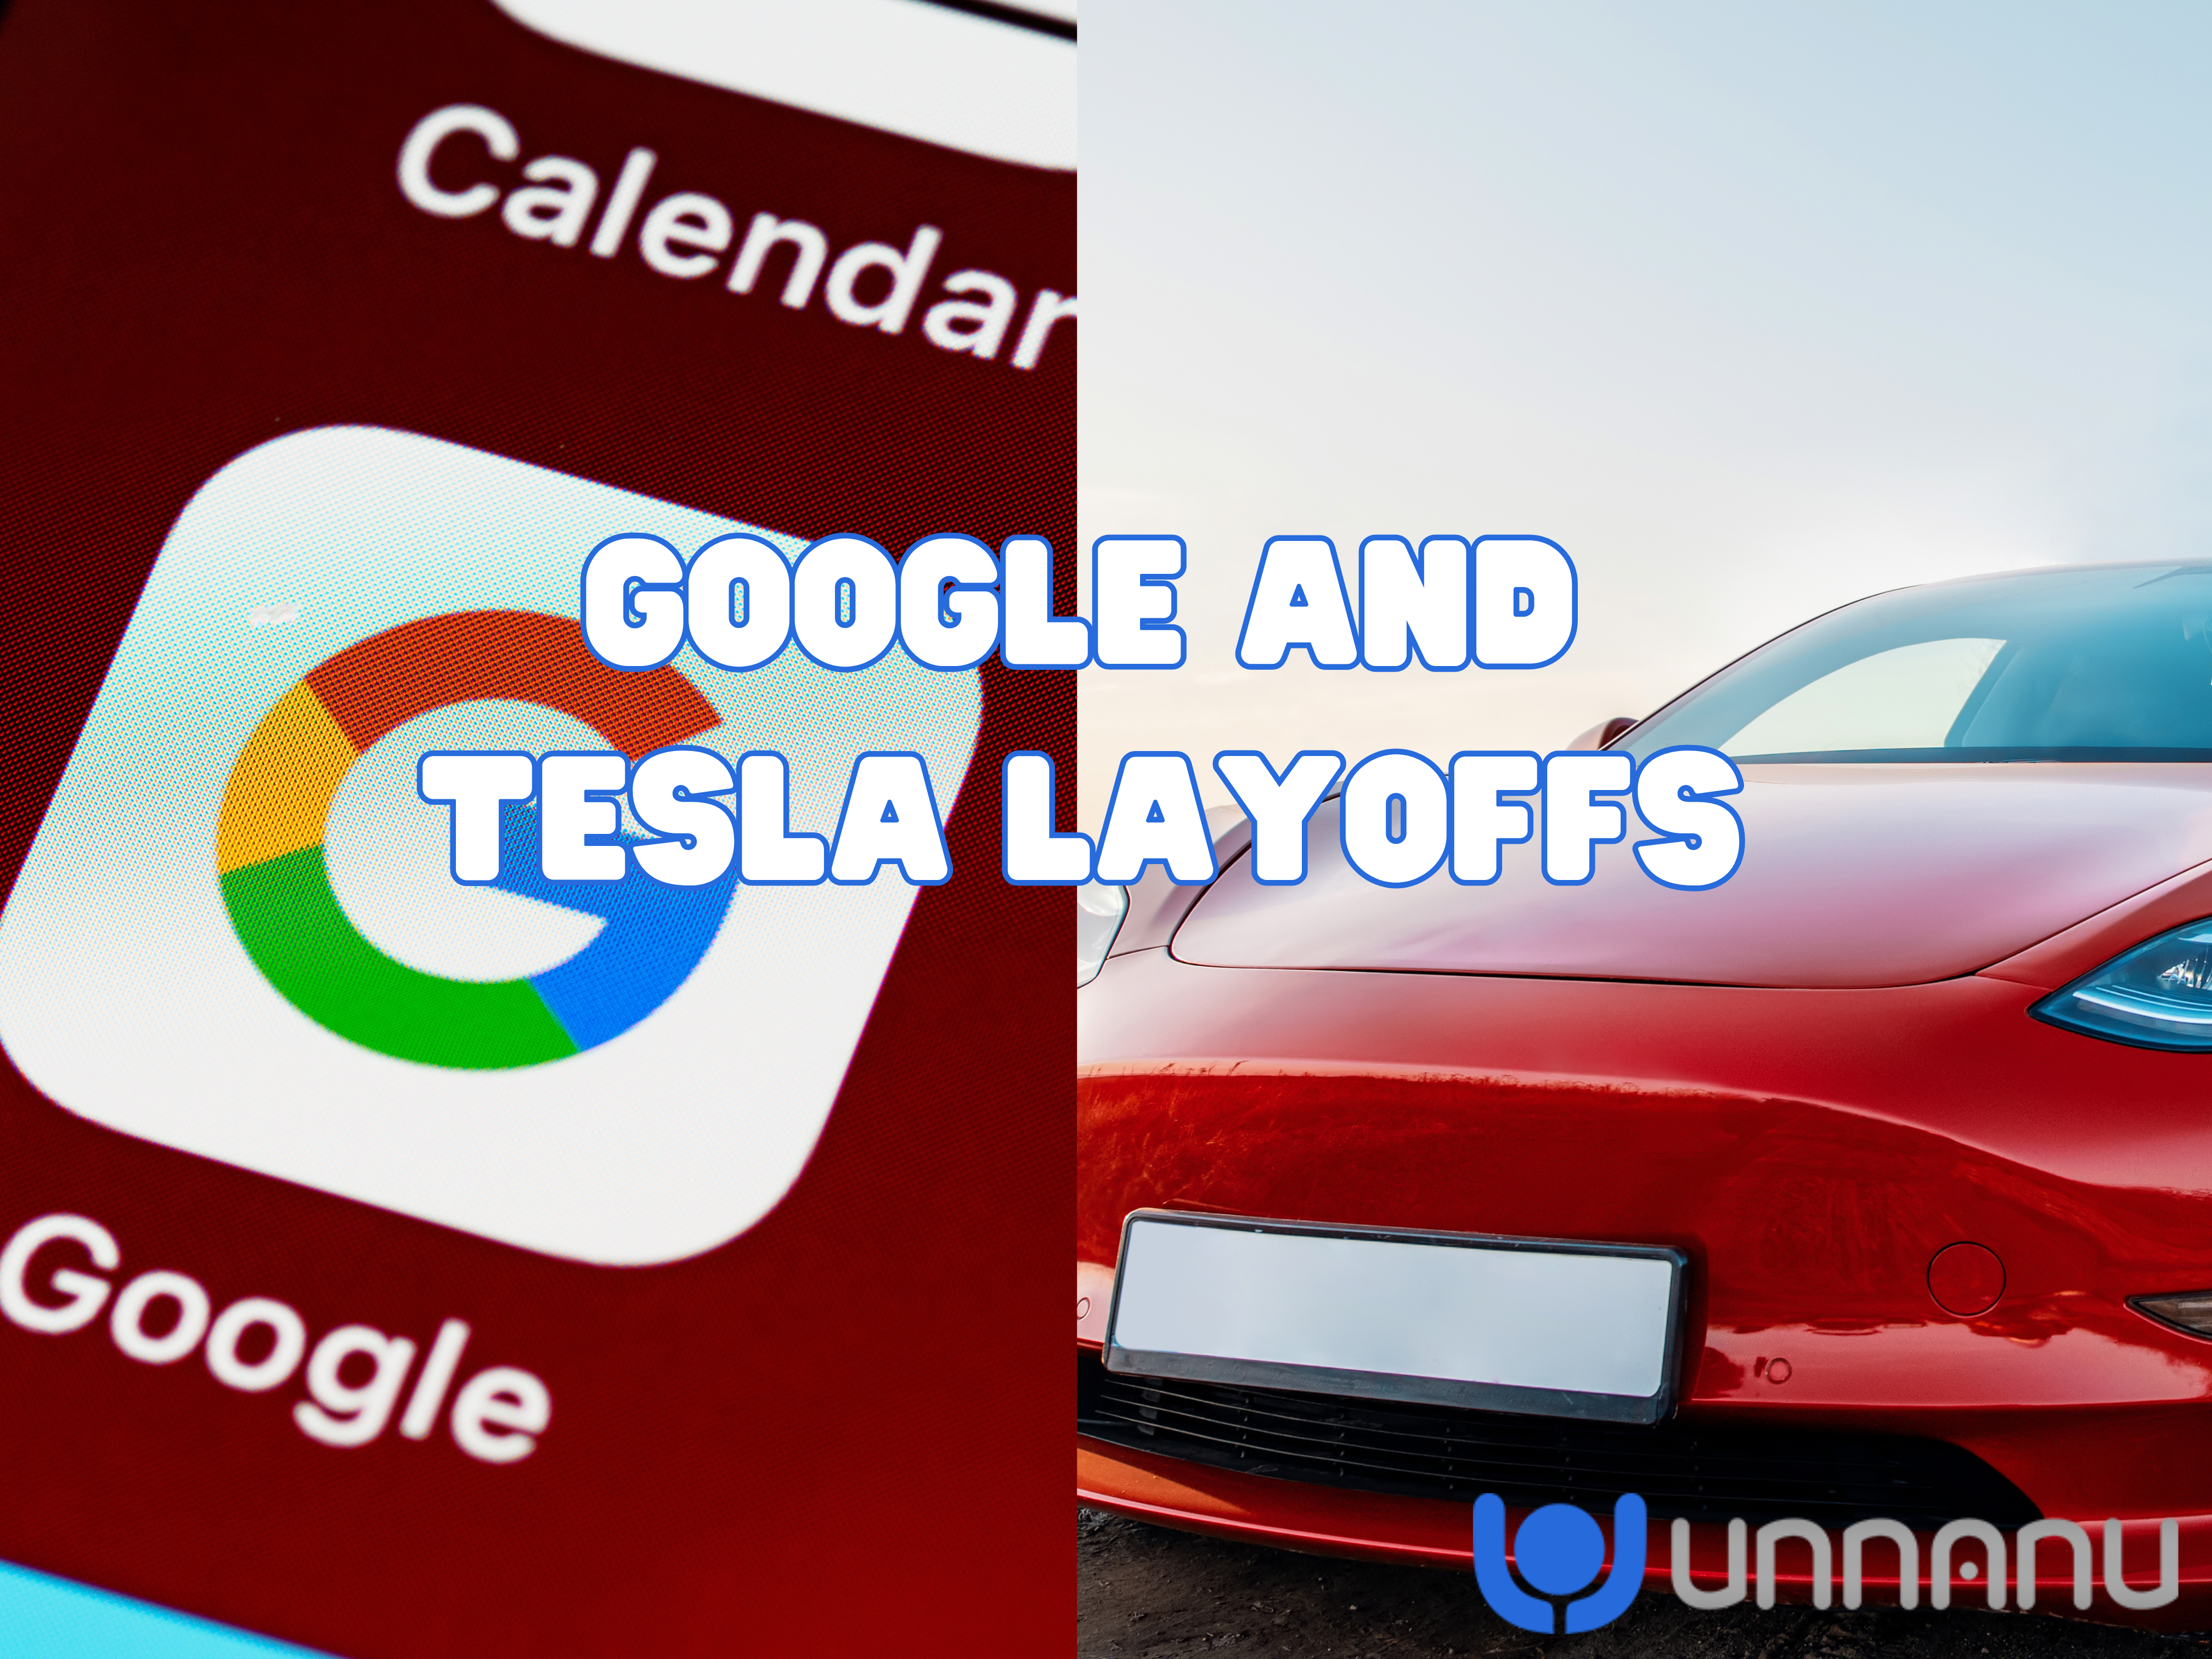 Google Tesla layoffs Restructuring Towards AI and Talent from Other Countries